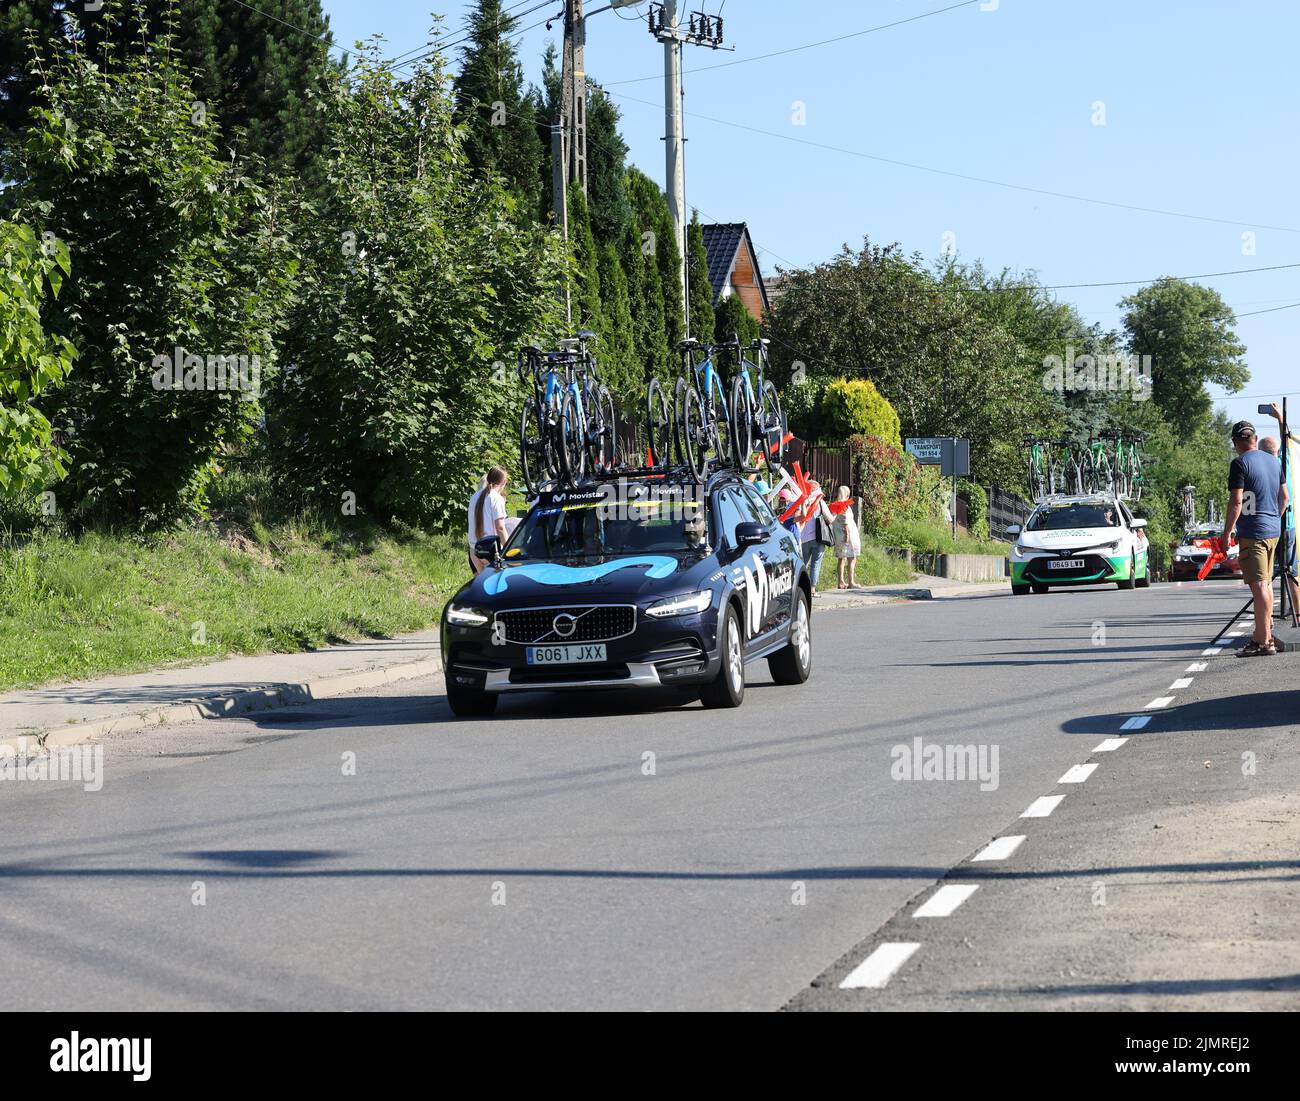 Krakow, Poland - August 5, 2022:  Movistar Team vehicle on the route of Tour de Pologne UCI – World Tour, stage 7 Skawina - Krakow. The biggest cycling event in Eastern Europe. Stock Photo